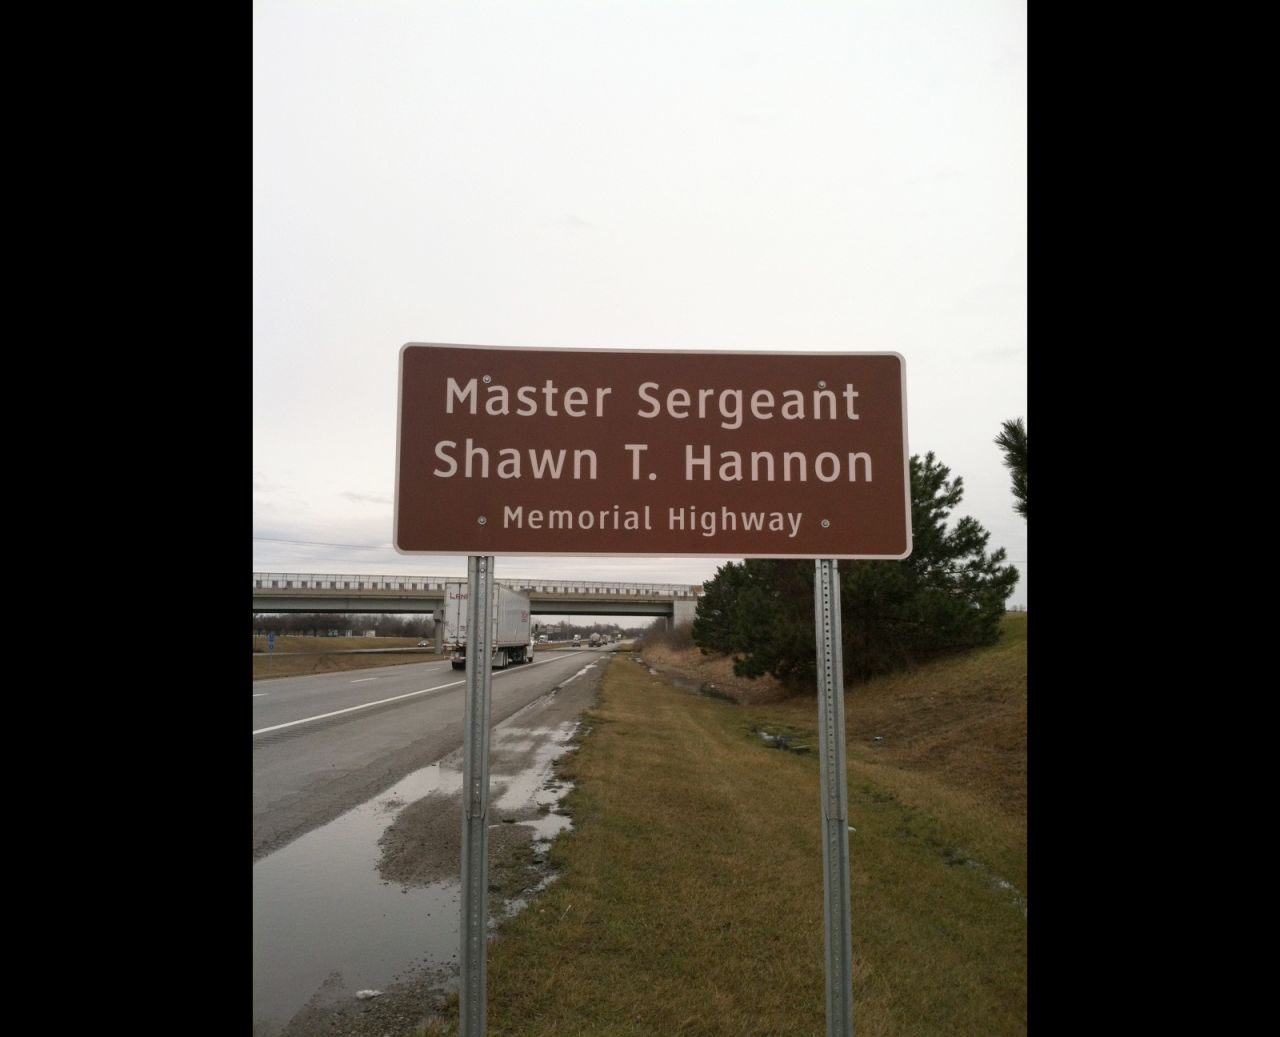 A highway sign on Interstate 71 in Grove City, Ohio, which runs near Army Master Sgt. Shawn T. Hannon's hometown. He is one of some 70 fallen soldiers memorialized in road signs along Ohio's highways.